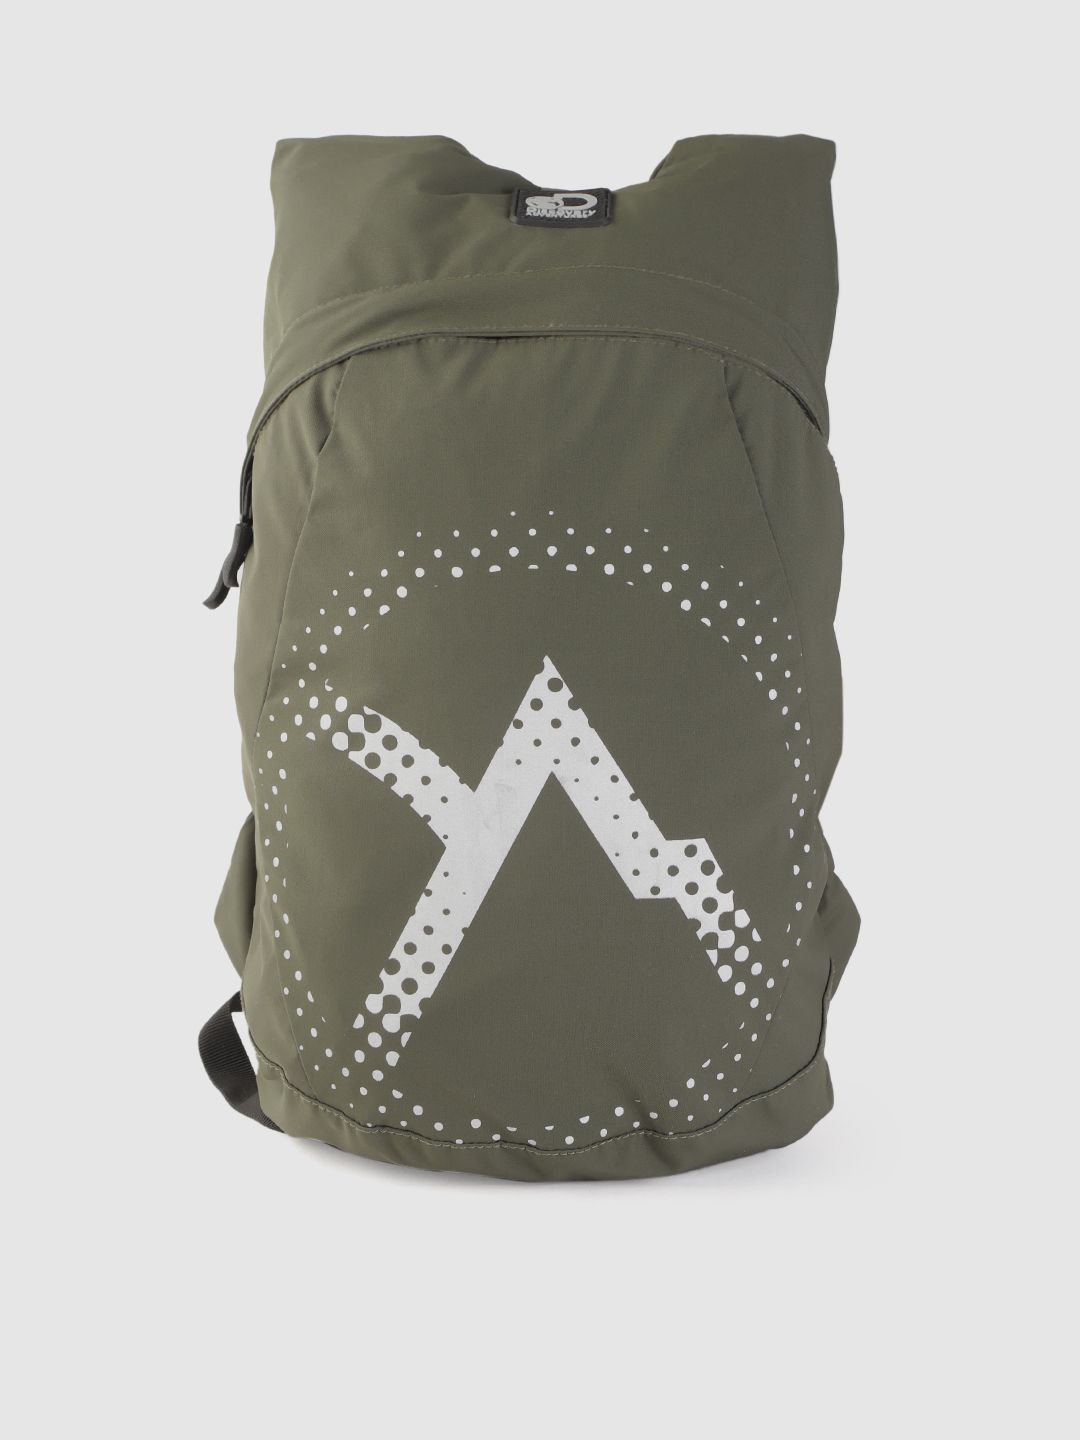 The Roadster Lifestyle Co x Discovery Adventures Unisex Green & White Graphic Print Foldable Backpack Price in India